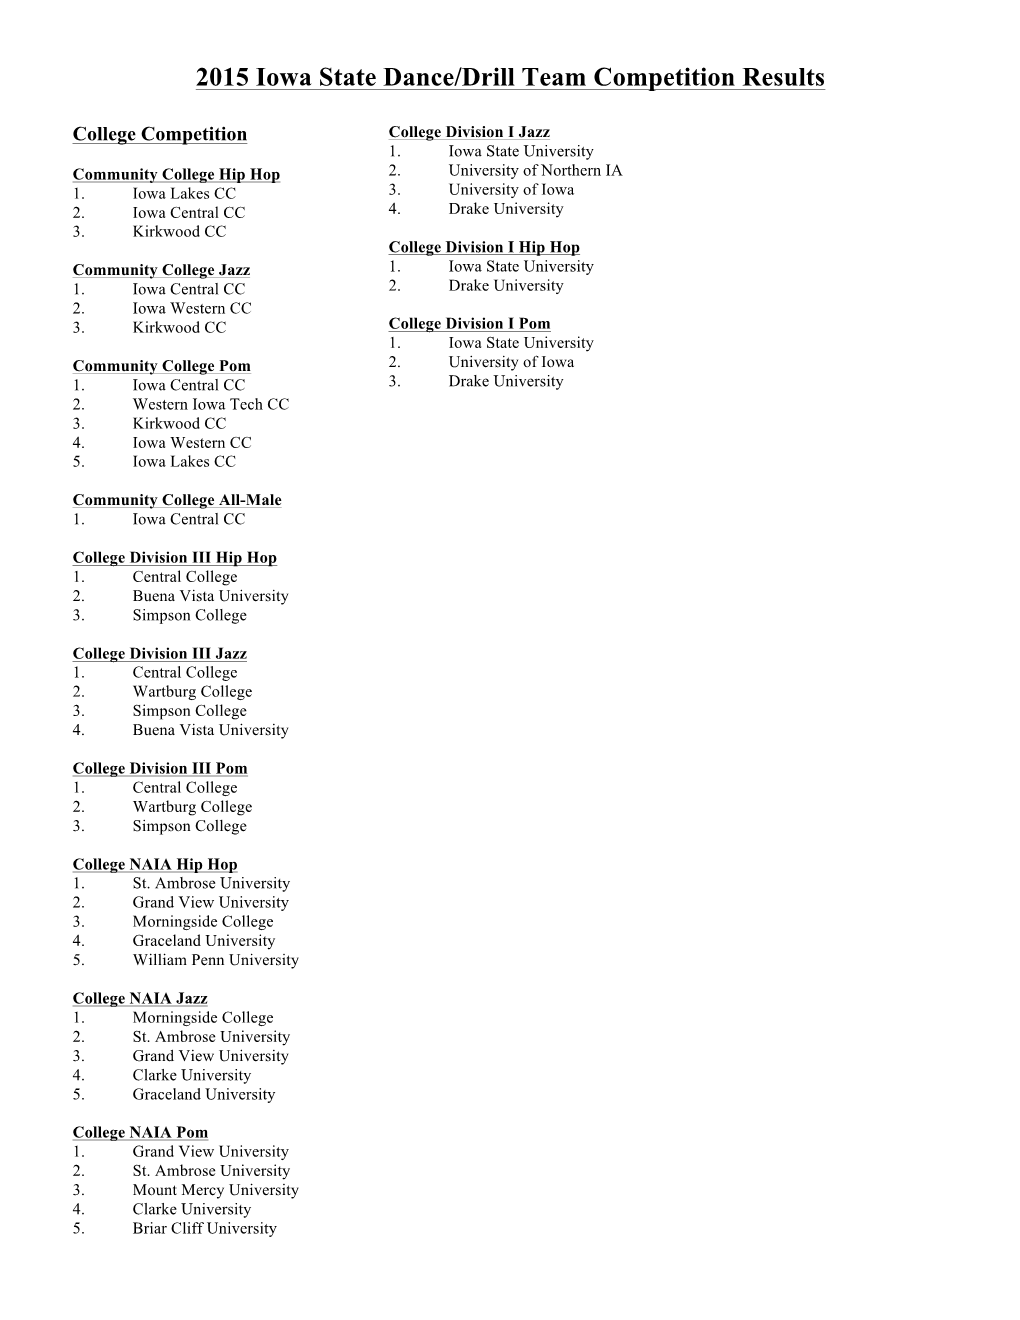 2015 Final Team Results